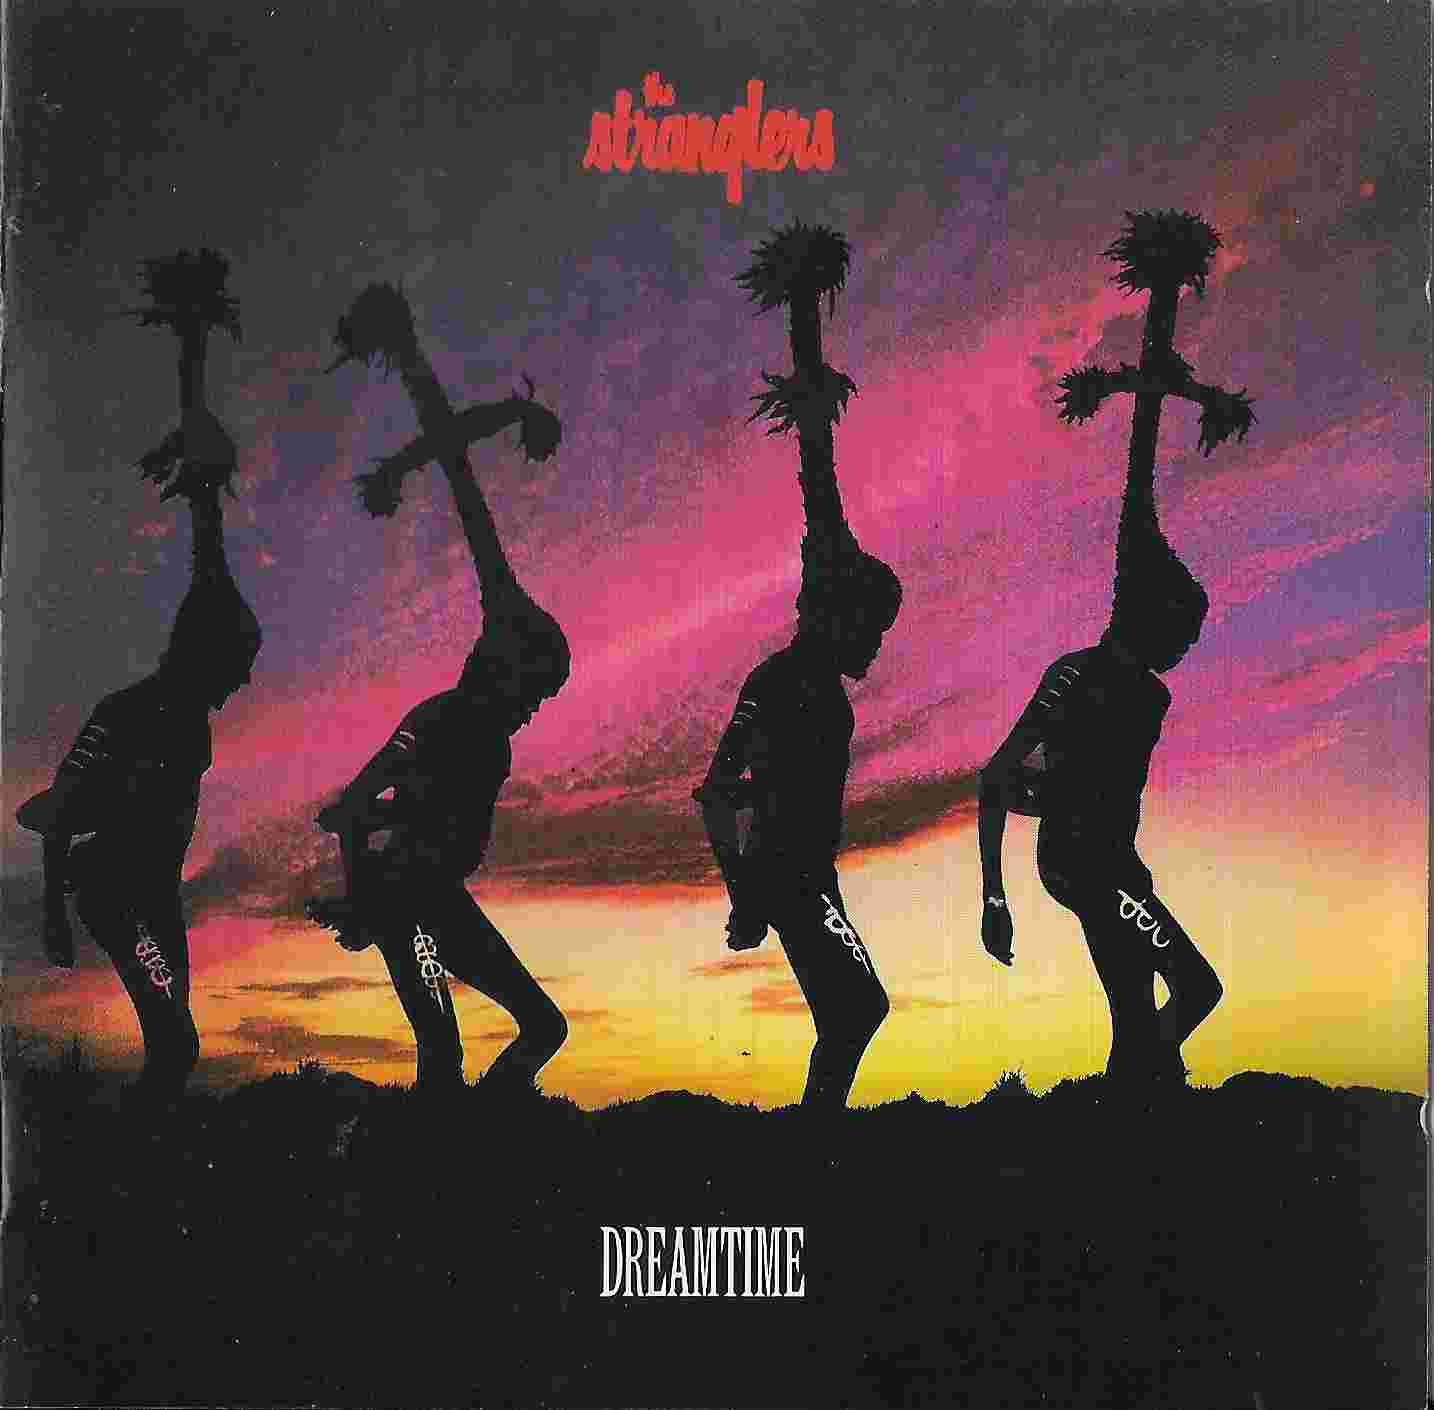 Picture of Dreamtime by artist The Stranglers  from The Stranglers cds